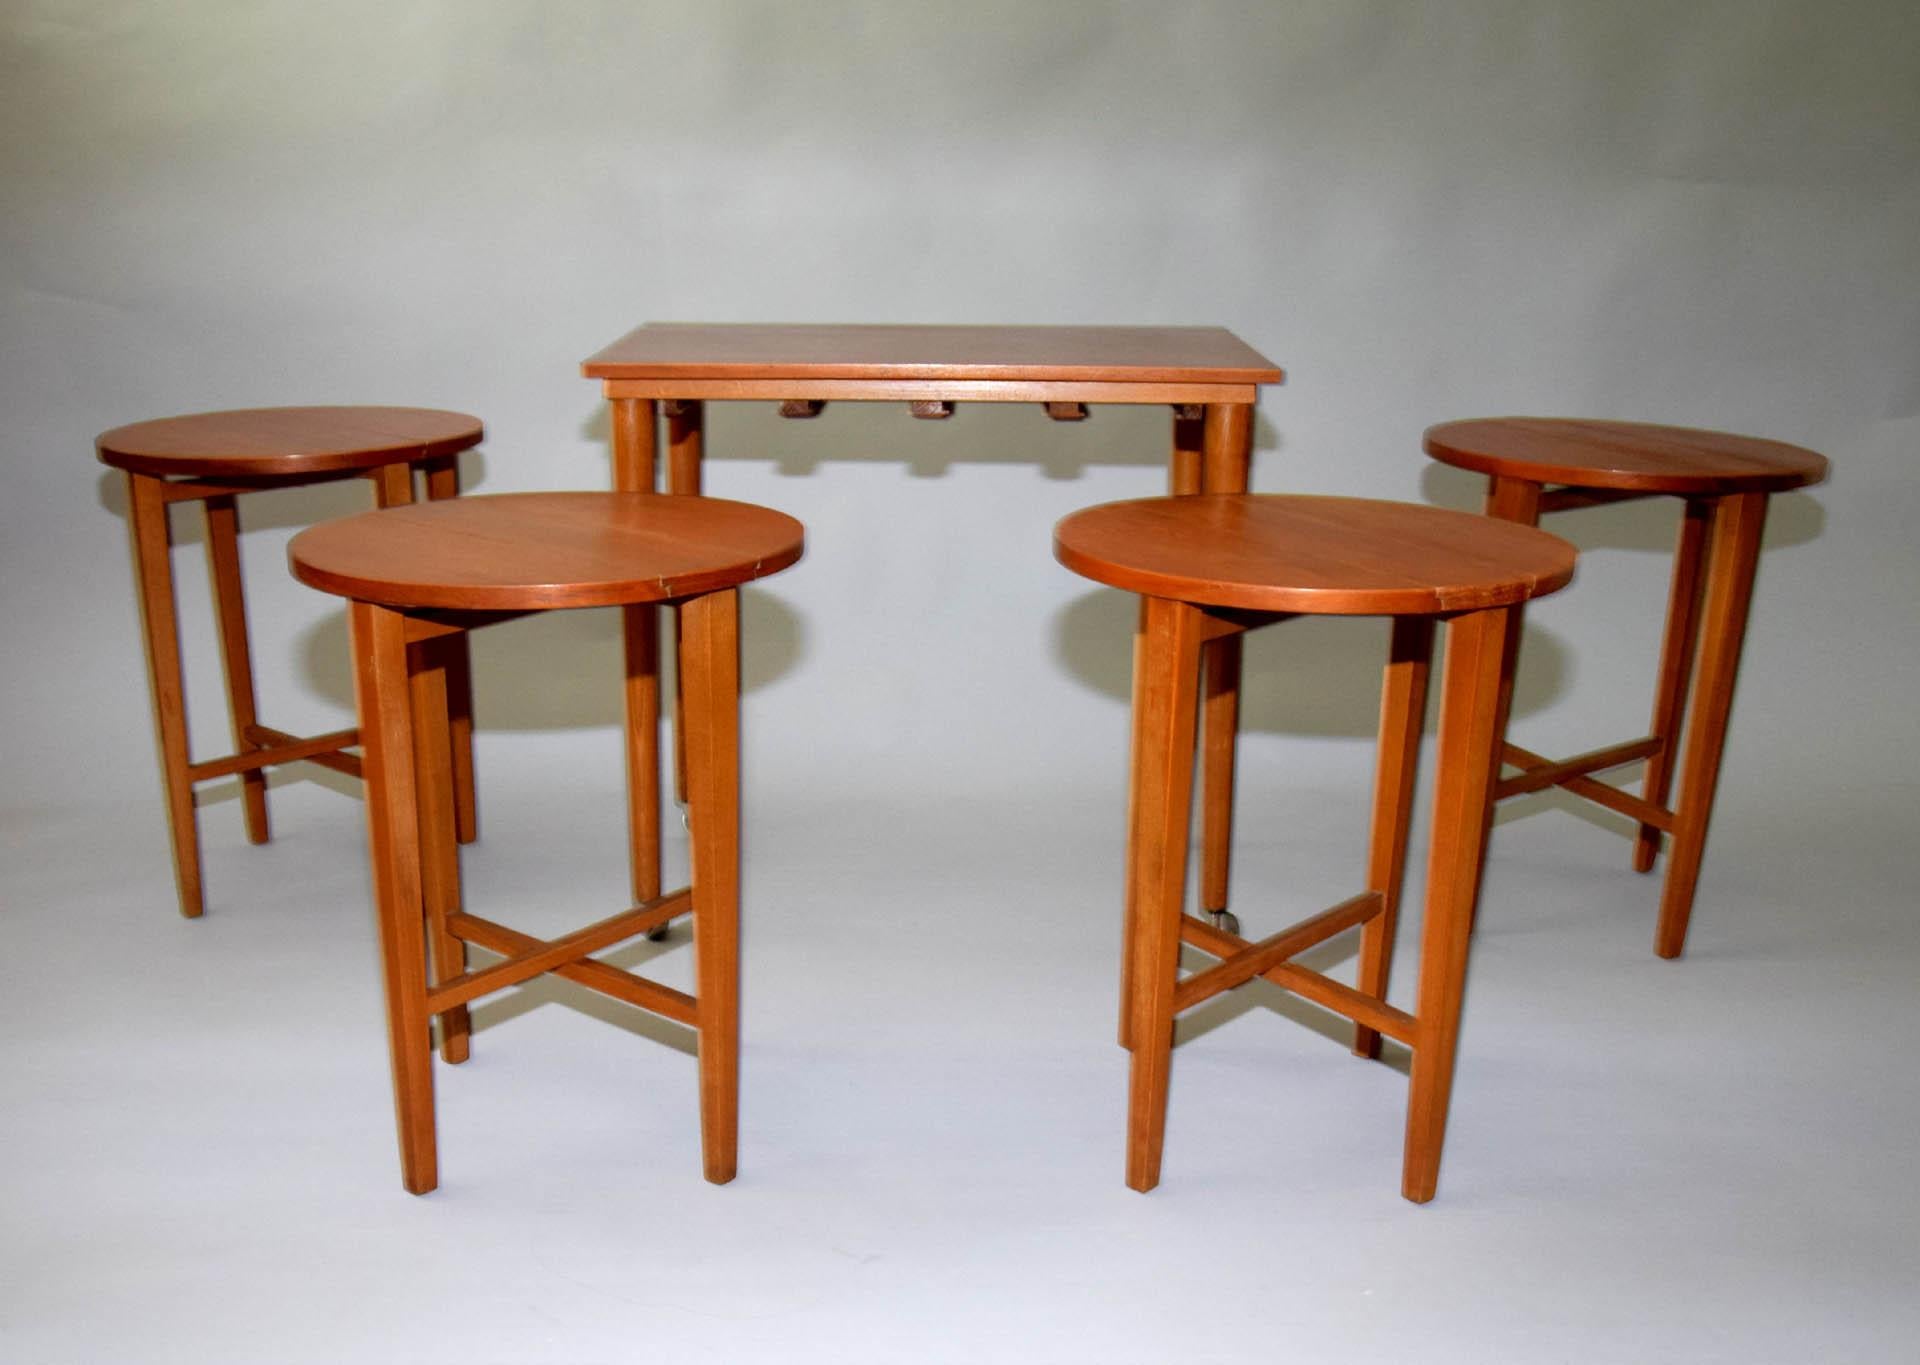 - 1960, Denmark
- Design: Poul Hundevad
- Good original condition
- Carefully cleaned
- Probably made of teak wood
- Published in book 